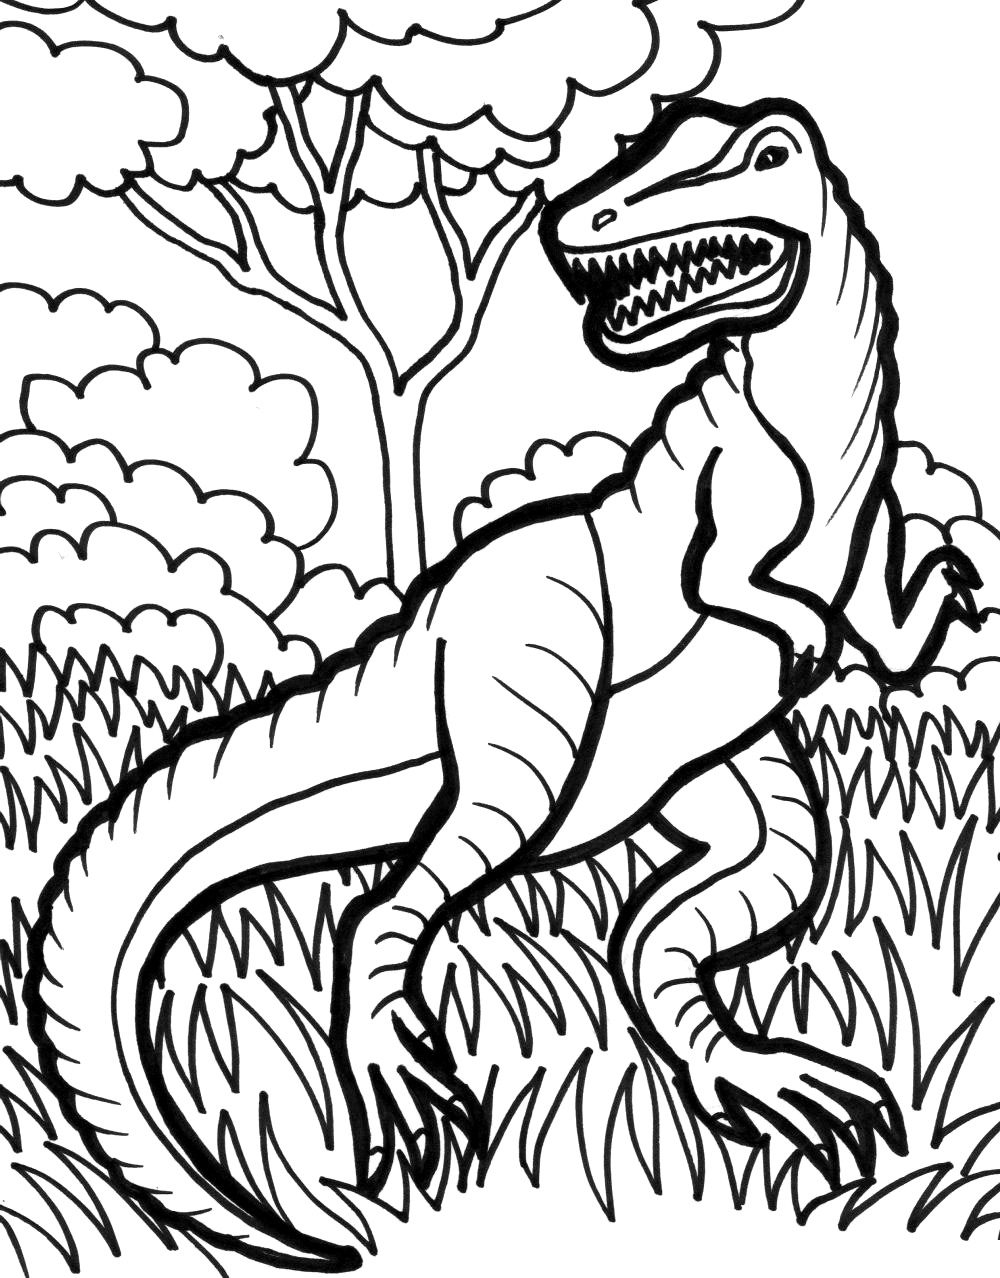 TRex Coloring Pages Best Coloring Pages For Kids